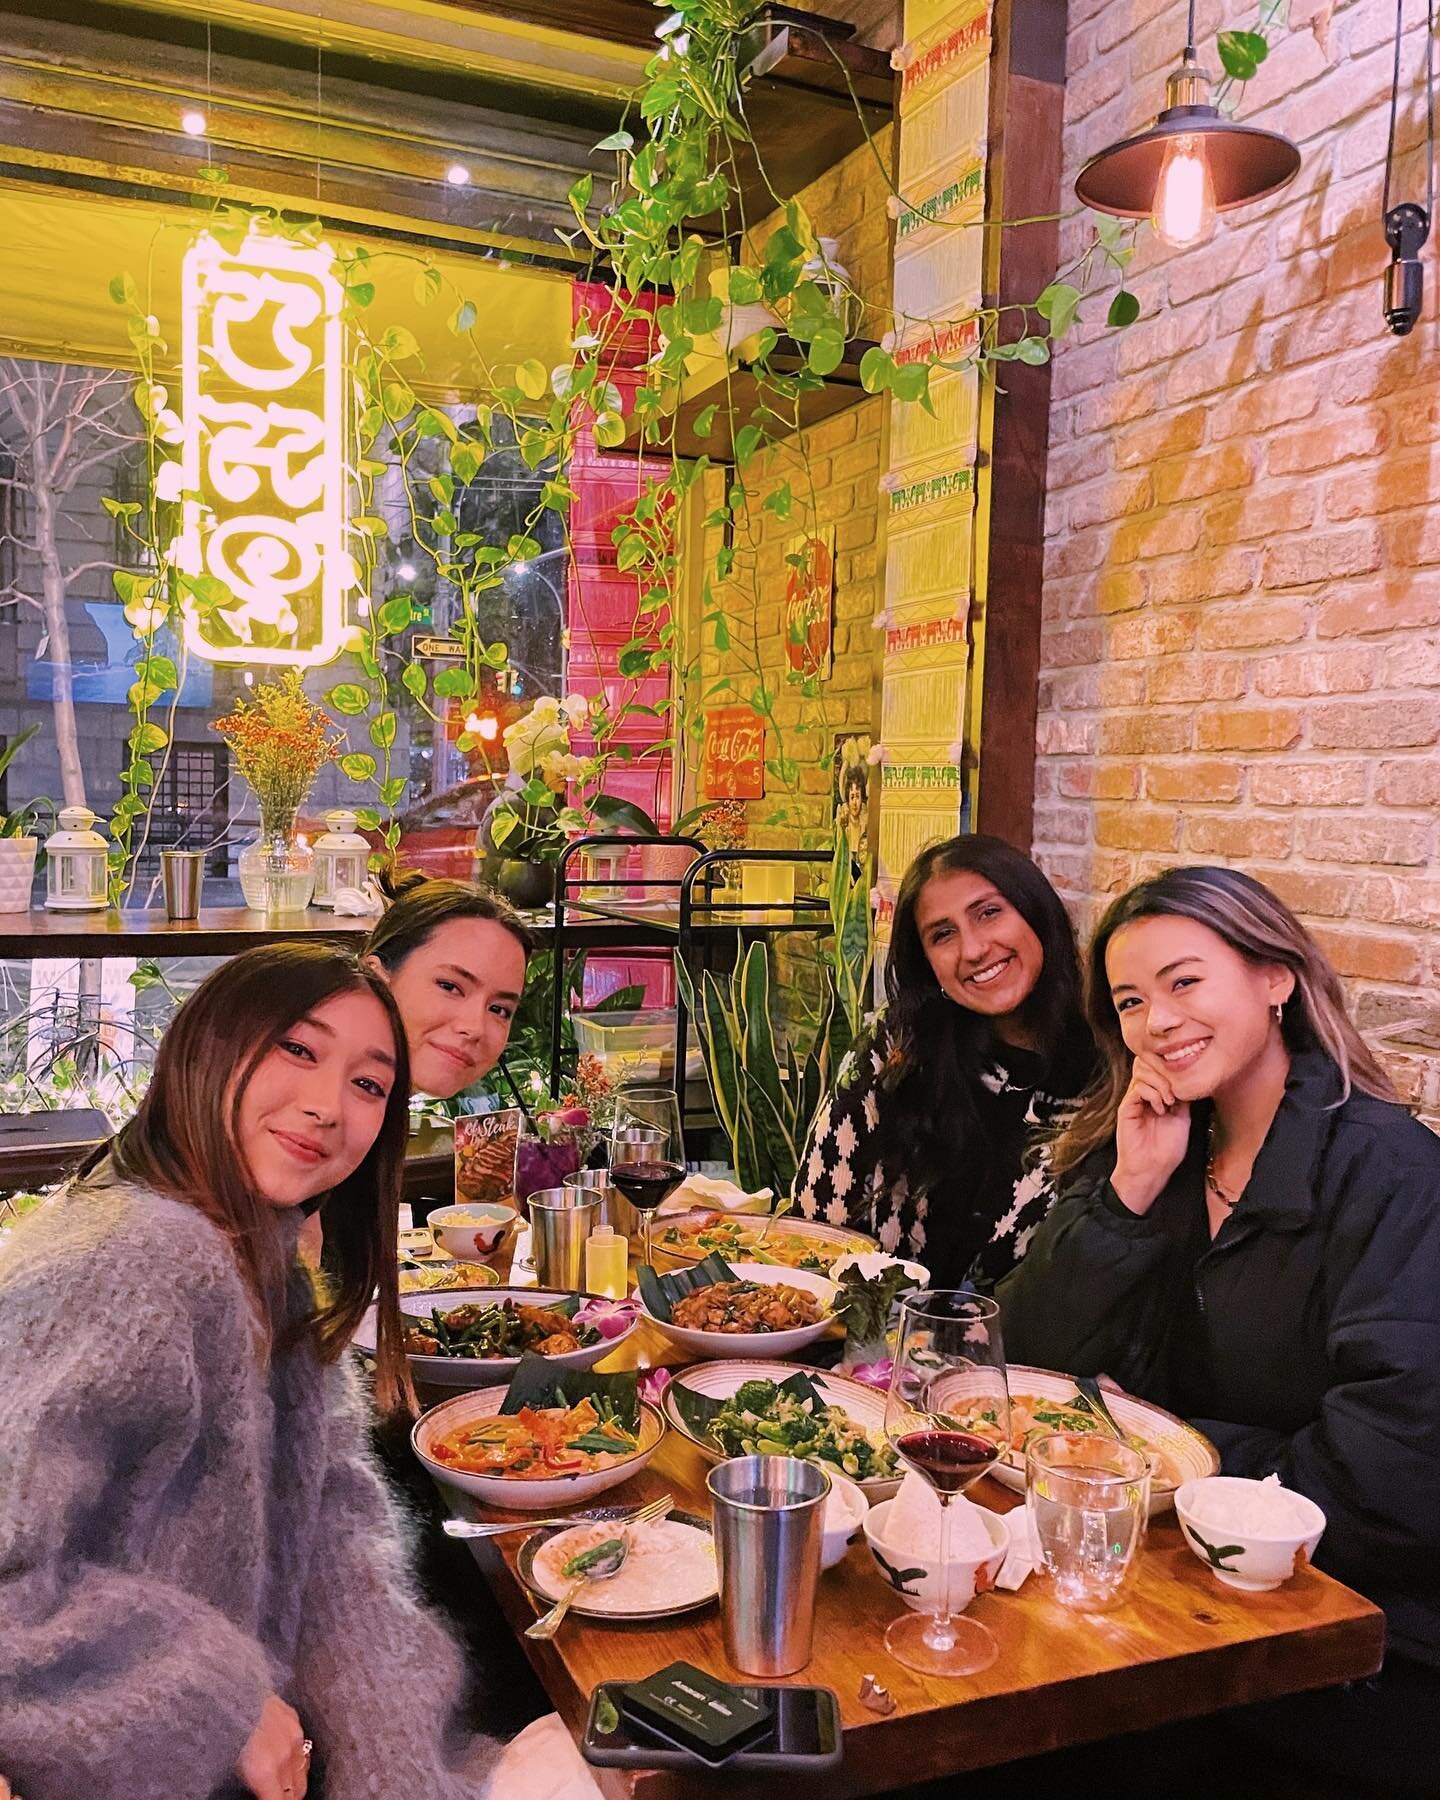 Look who is in da house today 😊
Thank you for having us 
Always happy to see you guys 🤟🏼

@aaashleyk @tanya_tastes 
🫶🏻

📍Lan Larb Chiangmai 

#lanlarbchiangmai 
☎️ (646) 895-9264
📍227 Centre st. NY
⏰11:30AM-10:00PM

#soho #thaifoodisthebest #b